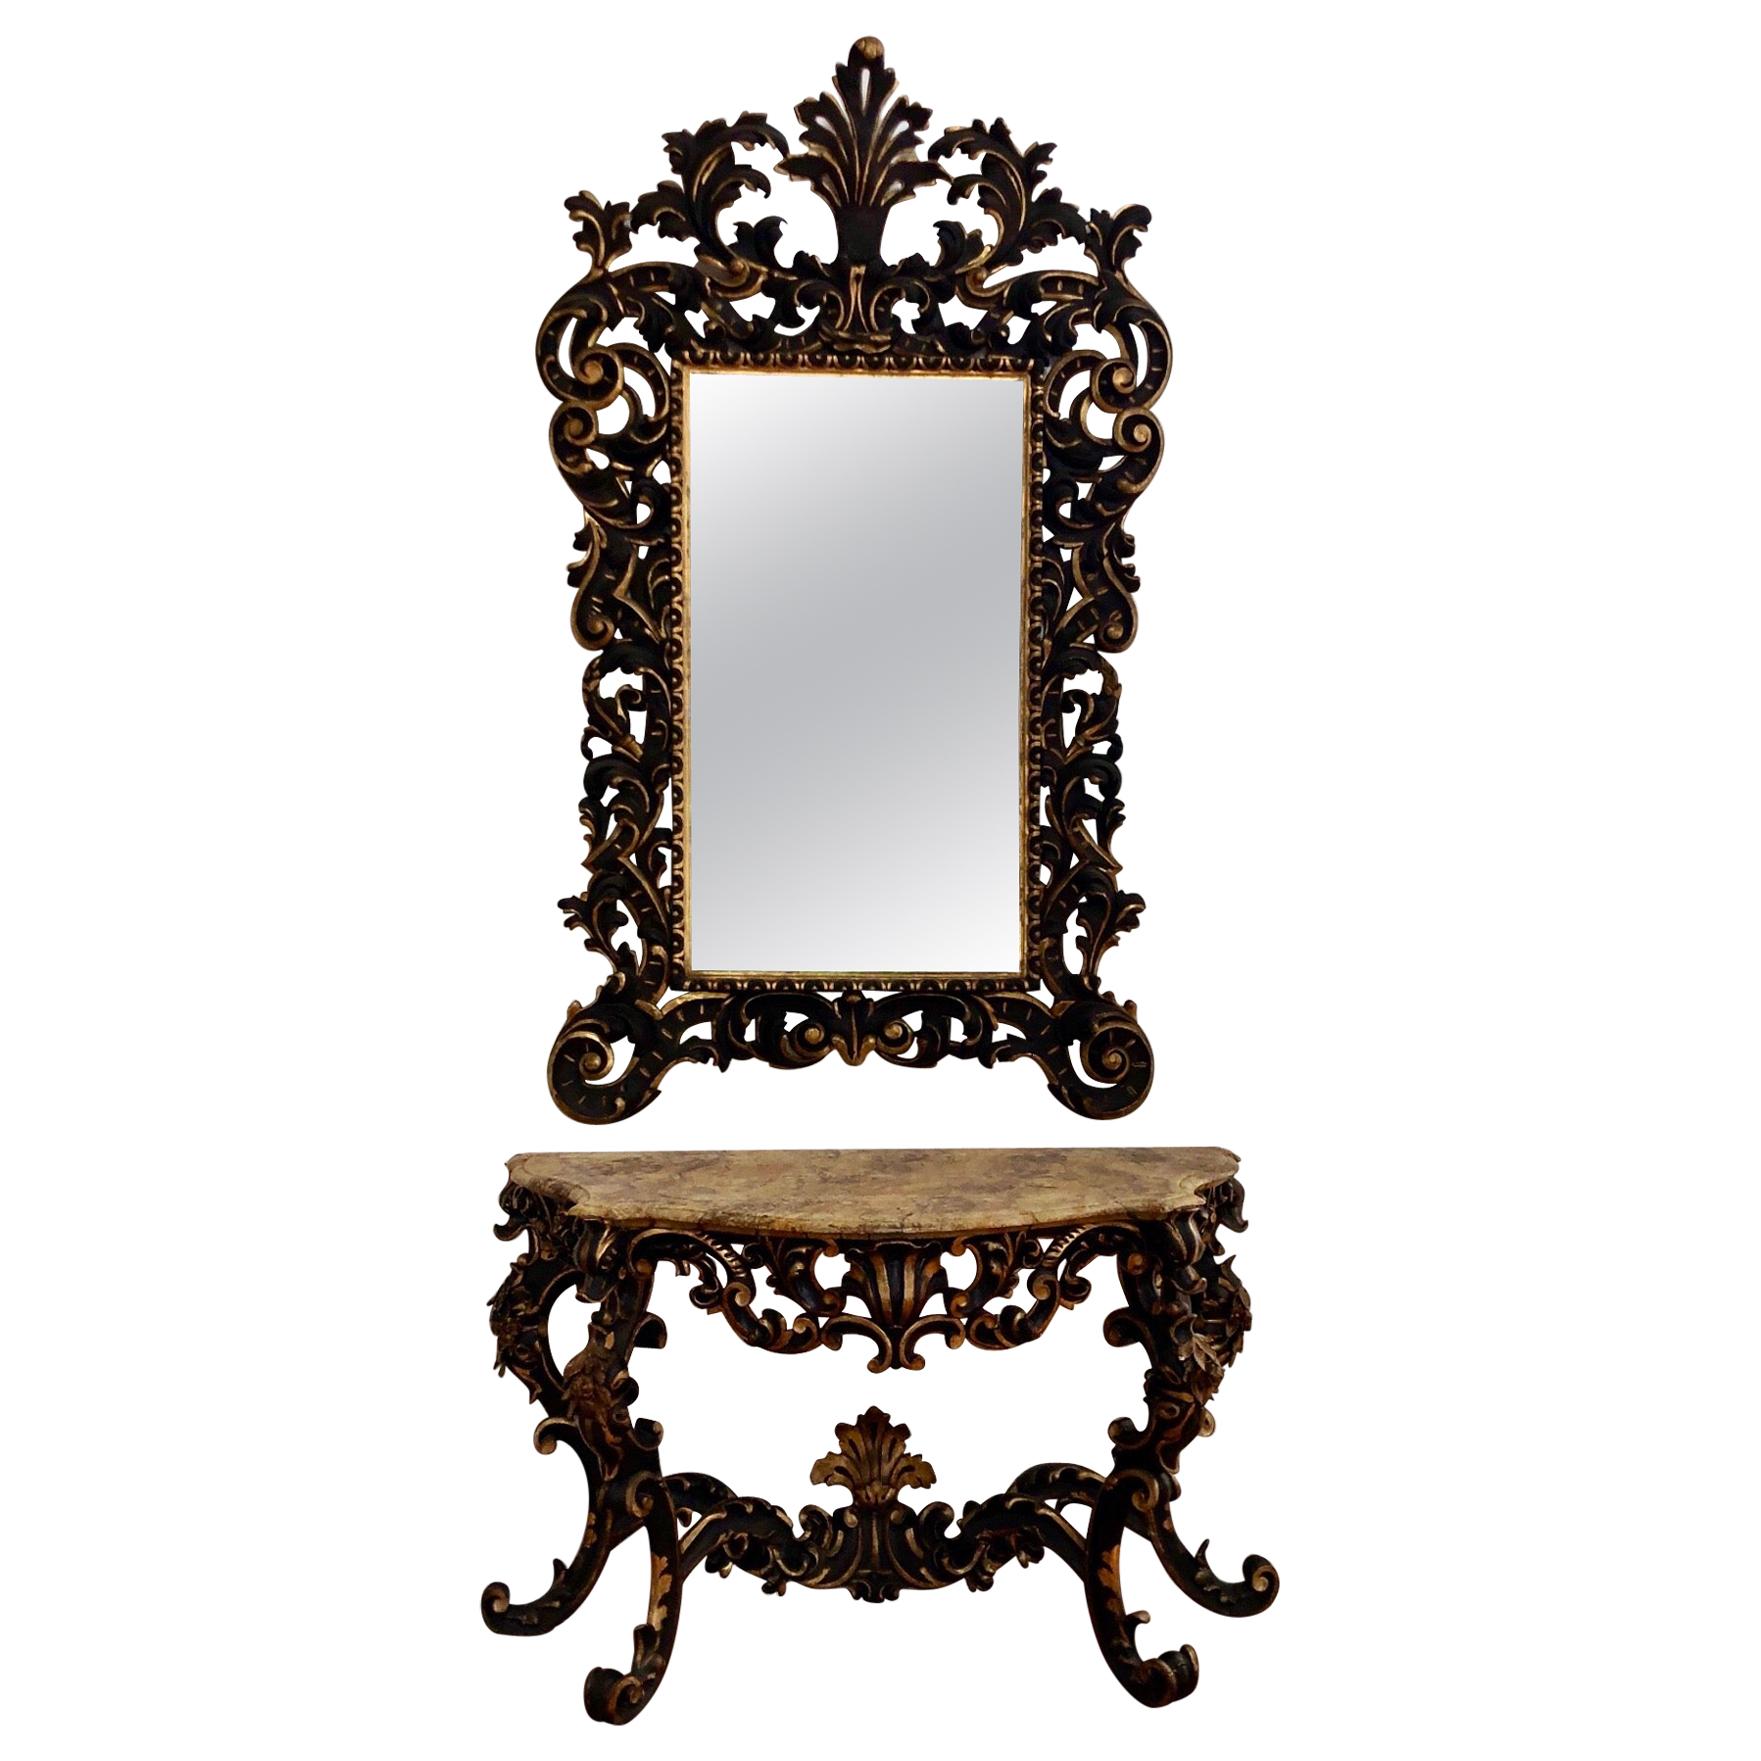 17th Century Venetian Console Table and Mirror